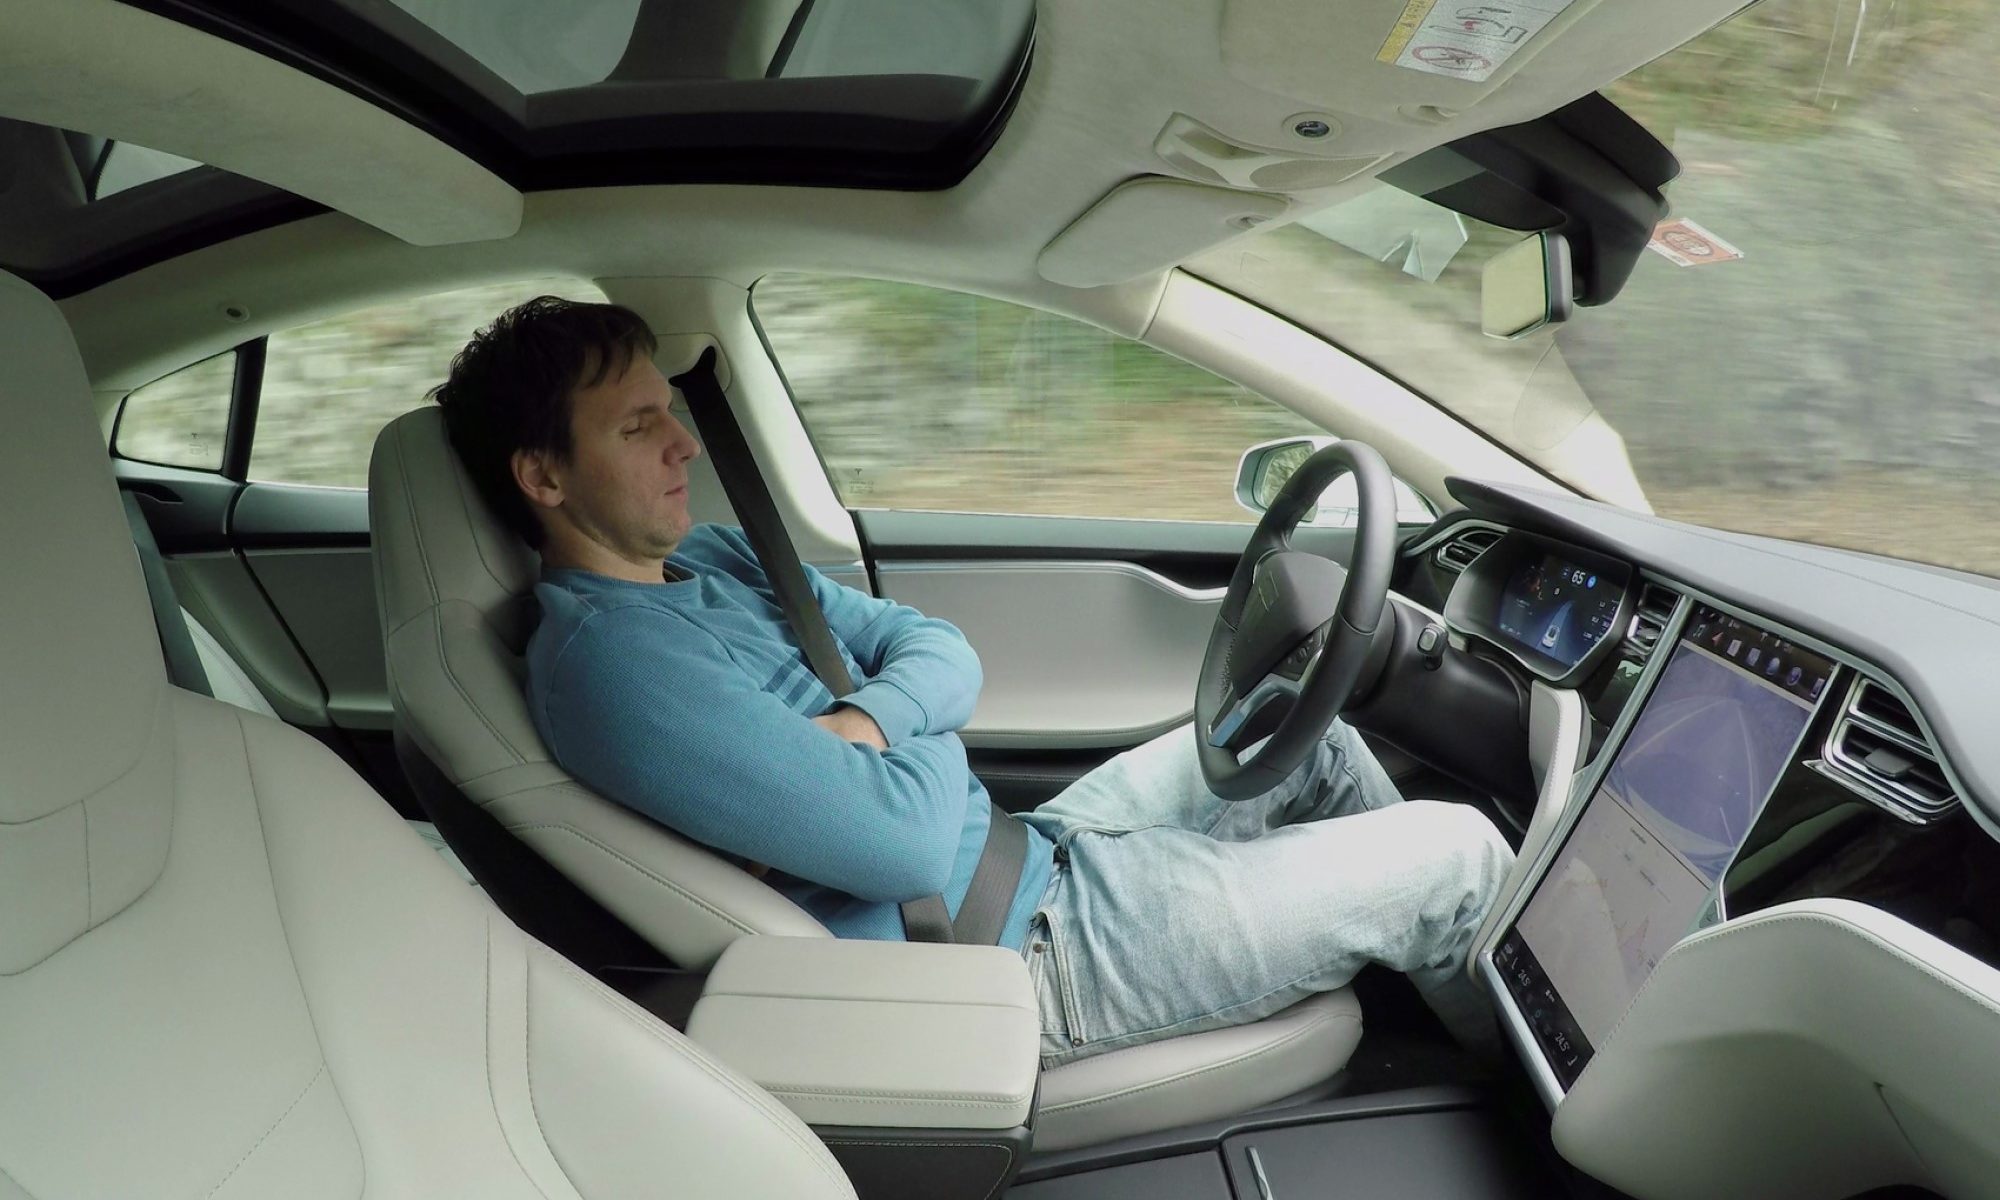 photograph of driver sleeping in self-driving car